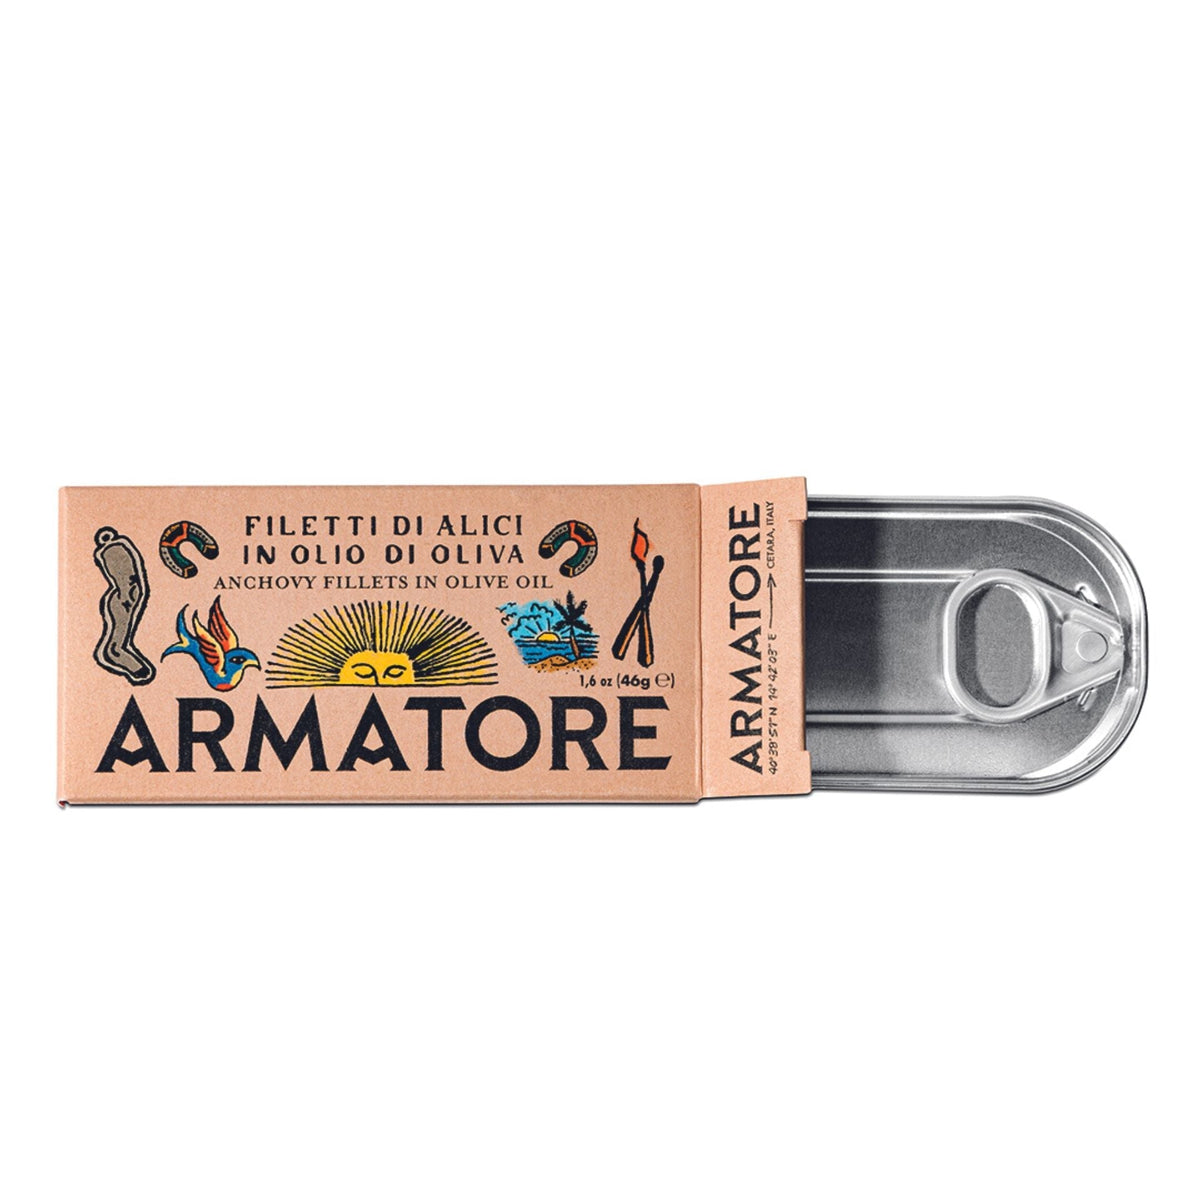 Armatore Anchovy Fillets in Olive Oil 45g  | Imported and distributed in the UK by Just Gourmet Foods